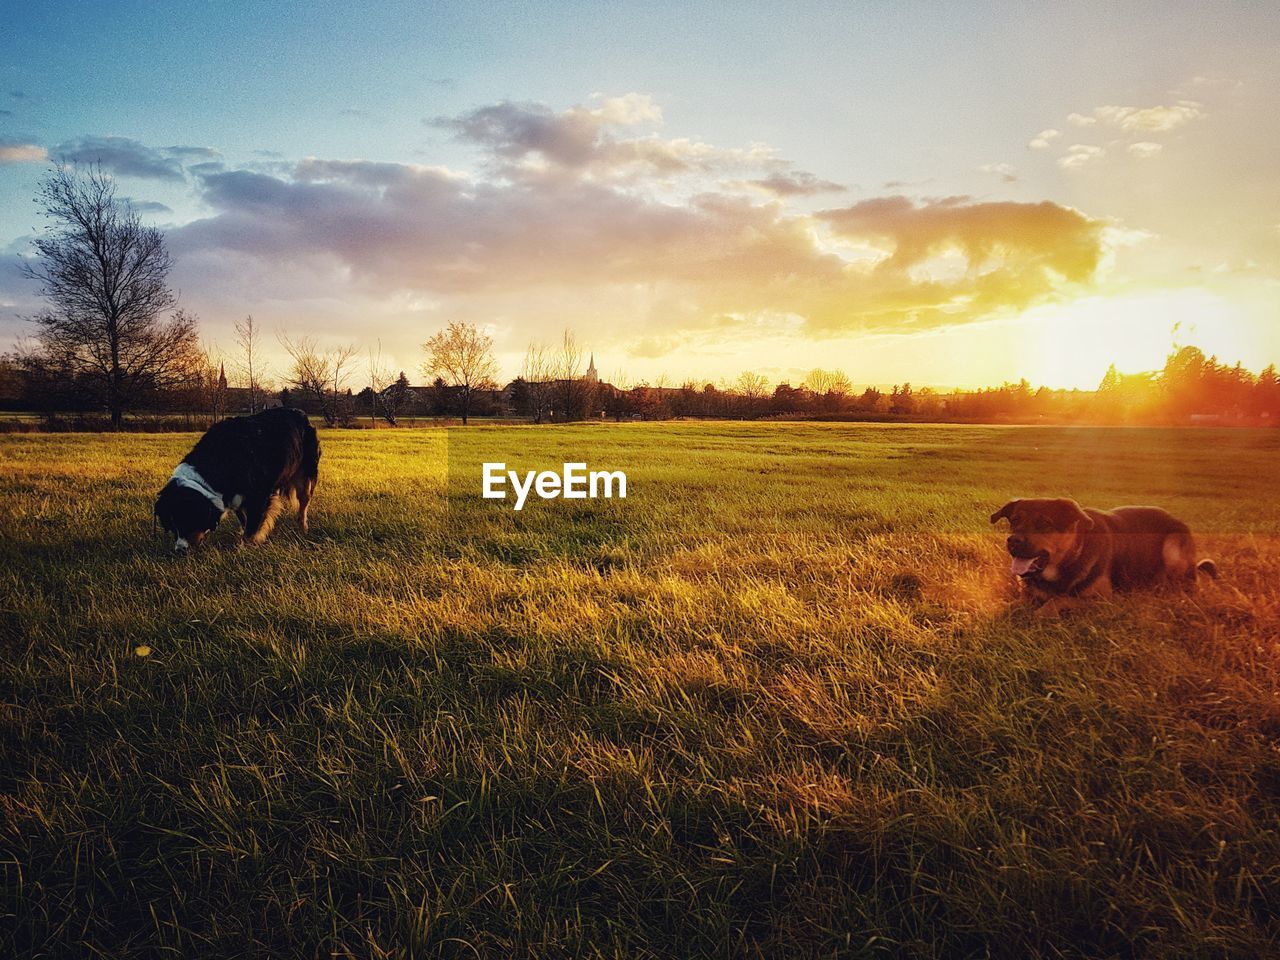 Dogs on field against sky during sunset